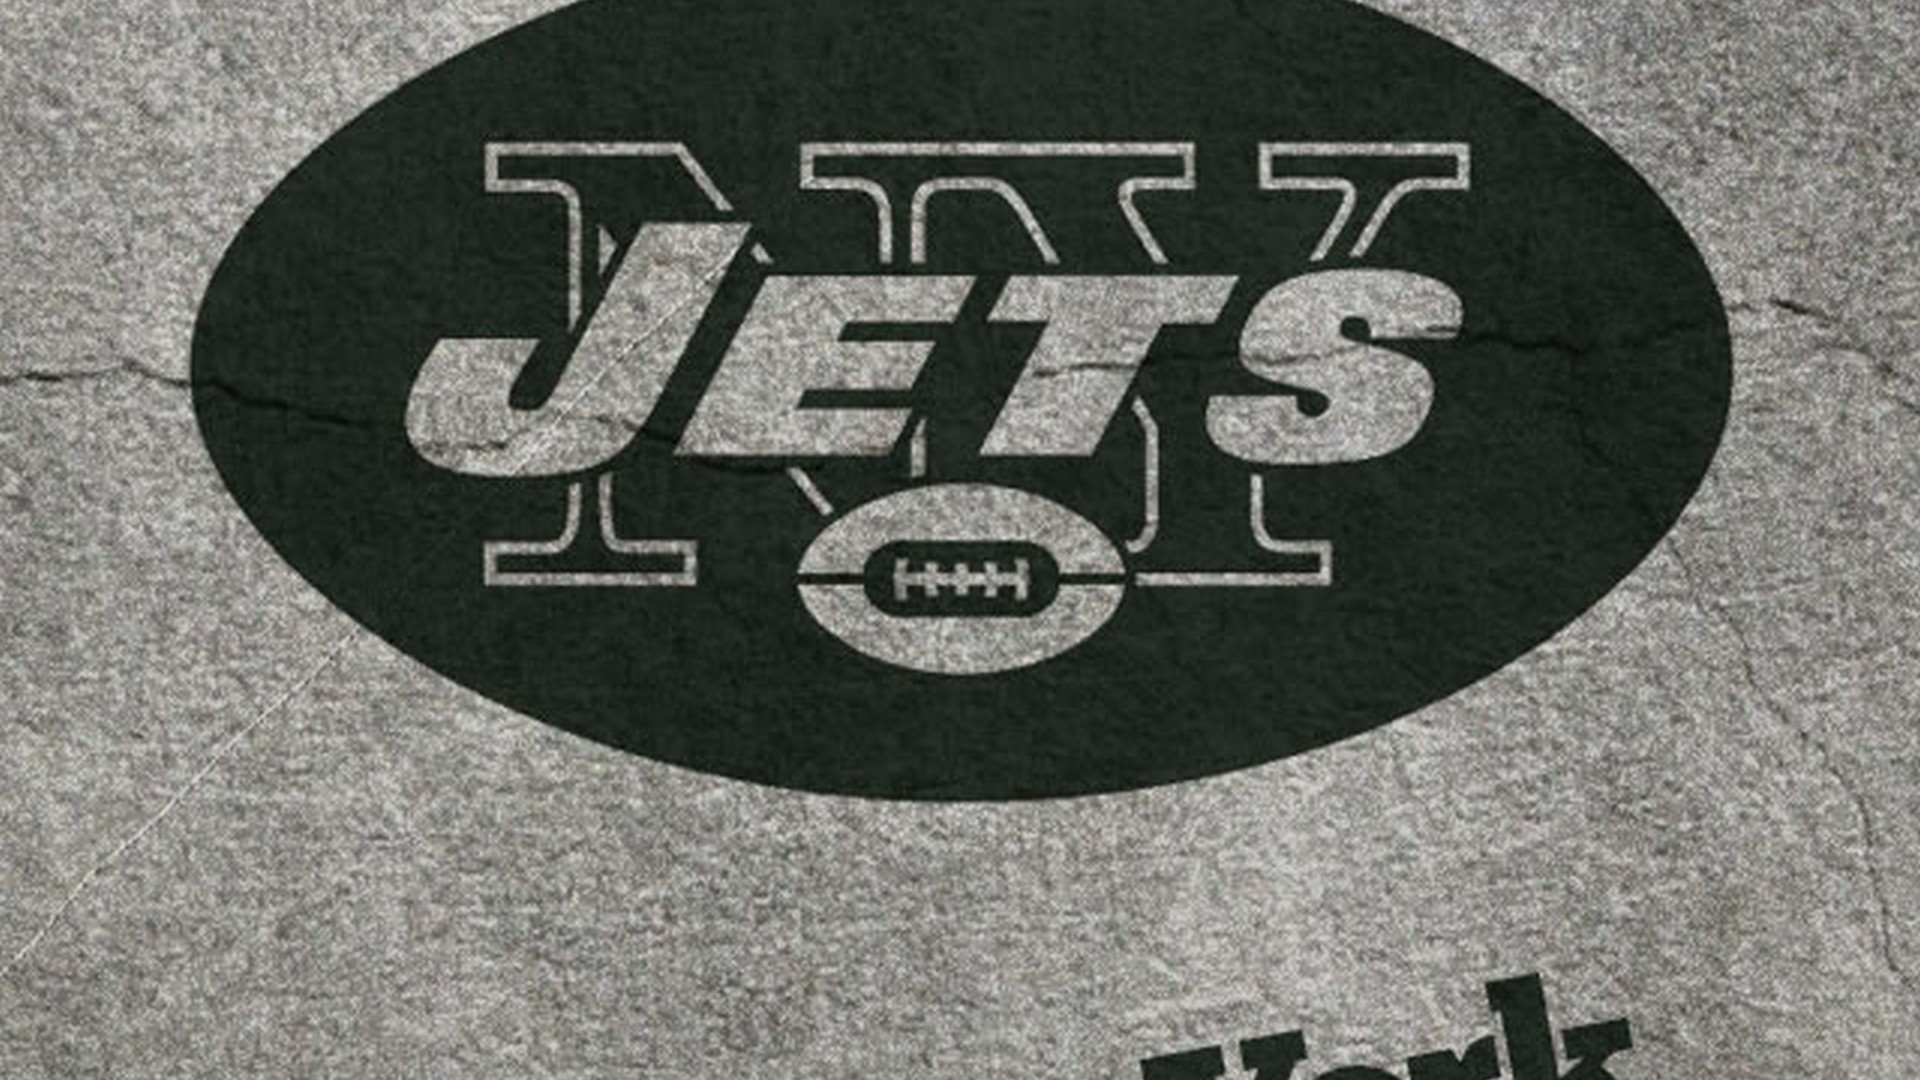 New York Jets Wallpaper For Mac Backgrounds With Resolution 1920X1080 pixel. You can make this wallpaper for your Mac or Windows Desktop Background, iPhone, Android or Tablet and another Smartphone device for free